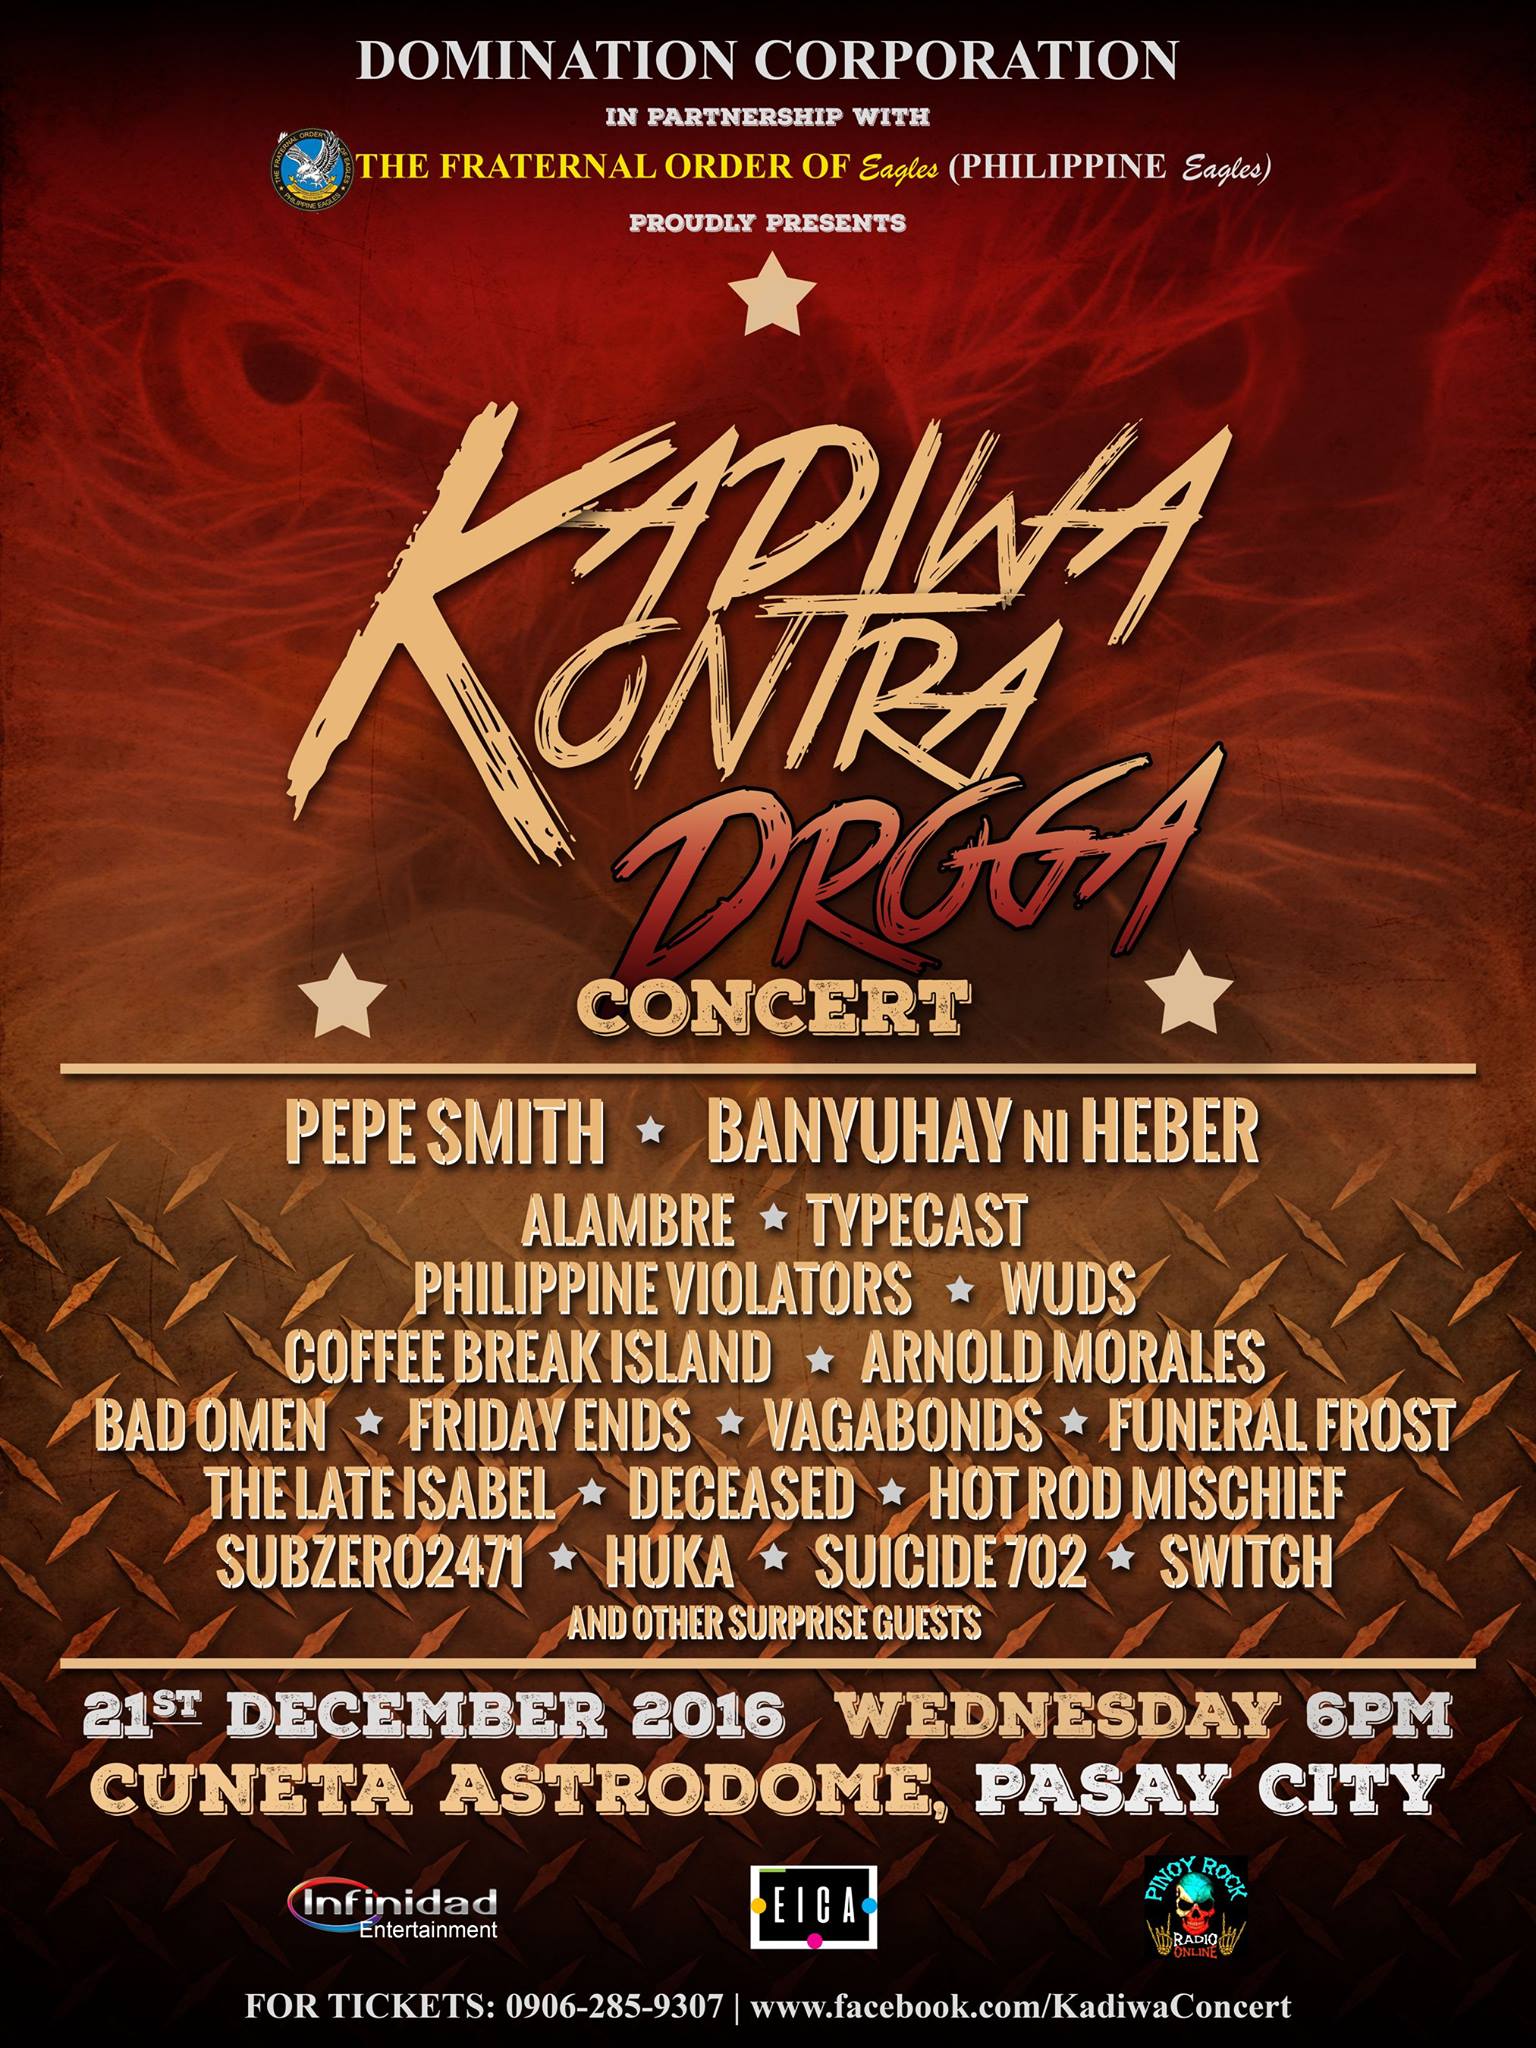 Kadiwa Kontra Droga Concert clock Tomorrow at 4 PM - 11 PM Tomorrow · 24–31° Partly Cloudy pin Show Map Cuneta Astrodome Roxas Boulevard, 1300 Pasay City, Philippines About Discussion Write Post Add Photo / Video Create Poll Details Solidarity in music! A multi-genre concert event uniting best of the best OPM artists. From underground punk, ska, blues, rock and roll up to the mainstream. ----- Kadiwa Kontra Droga Concert Series December 6 at 11:17pm · Tickets are now available for only P200! How to buy tickets? See poster for details or you may visit our official page and send us a message. #KadiwaKontraDrogaConcert #KadiwaConcert #PinoyUnderground #OPMRock